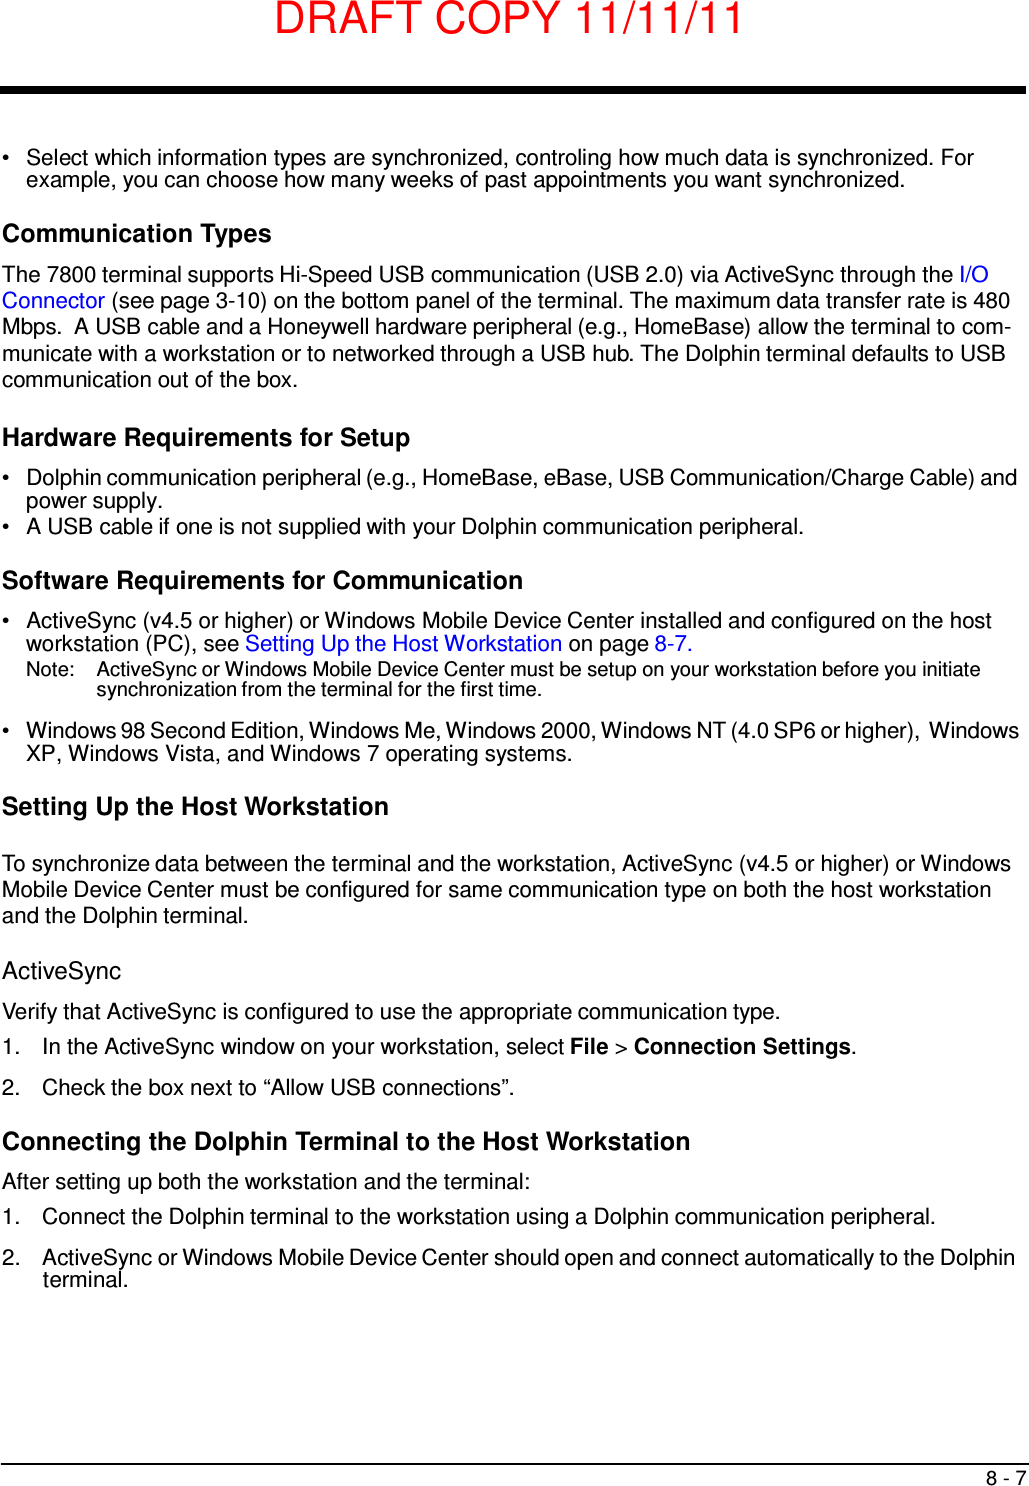 DRAFT COPY 11/11/11 8 - 7     •   Select which information types are synchronized, controling how much data is synchronized. For example, you can choose how many weeks of past appointments you want synchronized.  Communication Types  The 7800 terminal supports Hi-Speed USB communication (USB 2.0) via ActiveSync through the I/O Connector (see page 3-10) on the bottom panel of the terminal. The maximum data transfer rate is 480 Mbps.  A USB cable and a Honeywell hardware peripheral (e.g., HomeBase) allow the terminal to com- municate with a workstation or to networked through a USB hub. The Dolphin terminal defaults to USB communication out of the box.  Hardware Requirements for Setup  •   Dolphin communication peripheral (e.g., HomeBase, eBase, USB Communication/Charge Cable) and power supply. •   A USB cable if one is not supplied with your Dolphin communication peripheral.  Software Requirements for Communication  •   ActiveSync (v4.5 or higher) or Windows Mobile Device Center installed and configured on the host workstation (PC), see Setting Up the Host Workstation on page 8-7. Note:  ActiveSync or Windows Mobile Device Center must be setup on your workstation before you initiate synchronization from the terminal for the first time.  •   Windows 98 Second Edition, Windows Me, Windows 2000, Windows NT (4.0 SP6 or higher), Windows XP, Windows Vista, and Windows 7 operating systems.  Setting Up the Host Workstation  To synchronize data between the terminal and the workstation, ActiveSync (v4.5 or higher) or Windows Mobile Device Center must be configured for same communication type on both the host workstation and the Dolphin terminal.  ActiveSync  Verify that ActiveSync is configured to use the appropriate communication type. 1.  In the ActiveSync window on your workstation, select File &gt; Connection Settings.  2.  Check the box next to “Allow USB connections”.  Connecting the Dolphin Terminal to the Host Workstation  After setting up both the workstation and the terminal: 1.  Connect the Dolphin terminal to the workstation using a Dolphin communication peripheral.  2.  ActiveSync or Windows Mobile Device Center should open and connect automatically to the Dolphin terminal. 